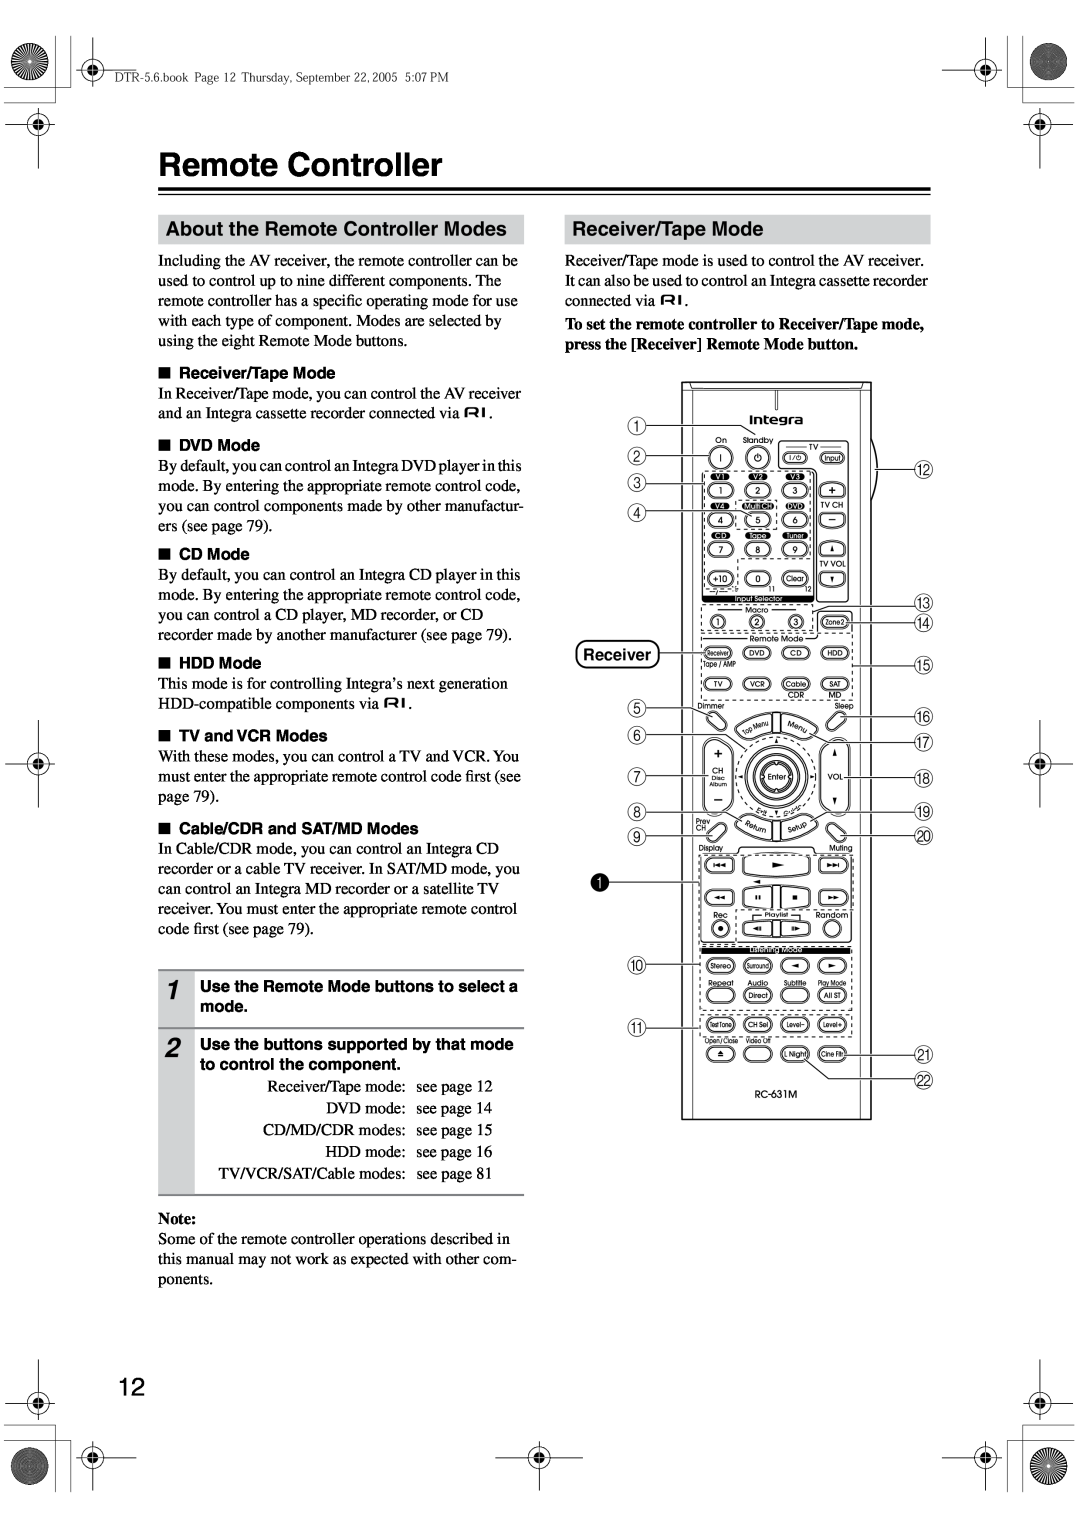 Integra DTR-5.6 instruction manual About the Remote Controller Modes, Receiver/Tape Mode 